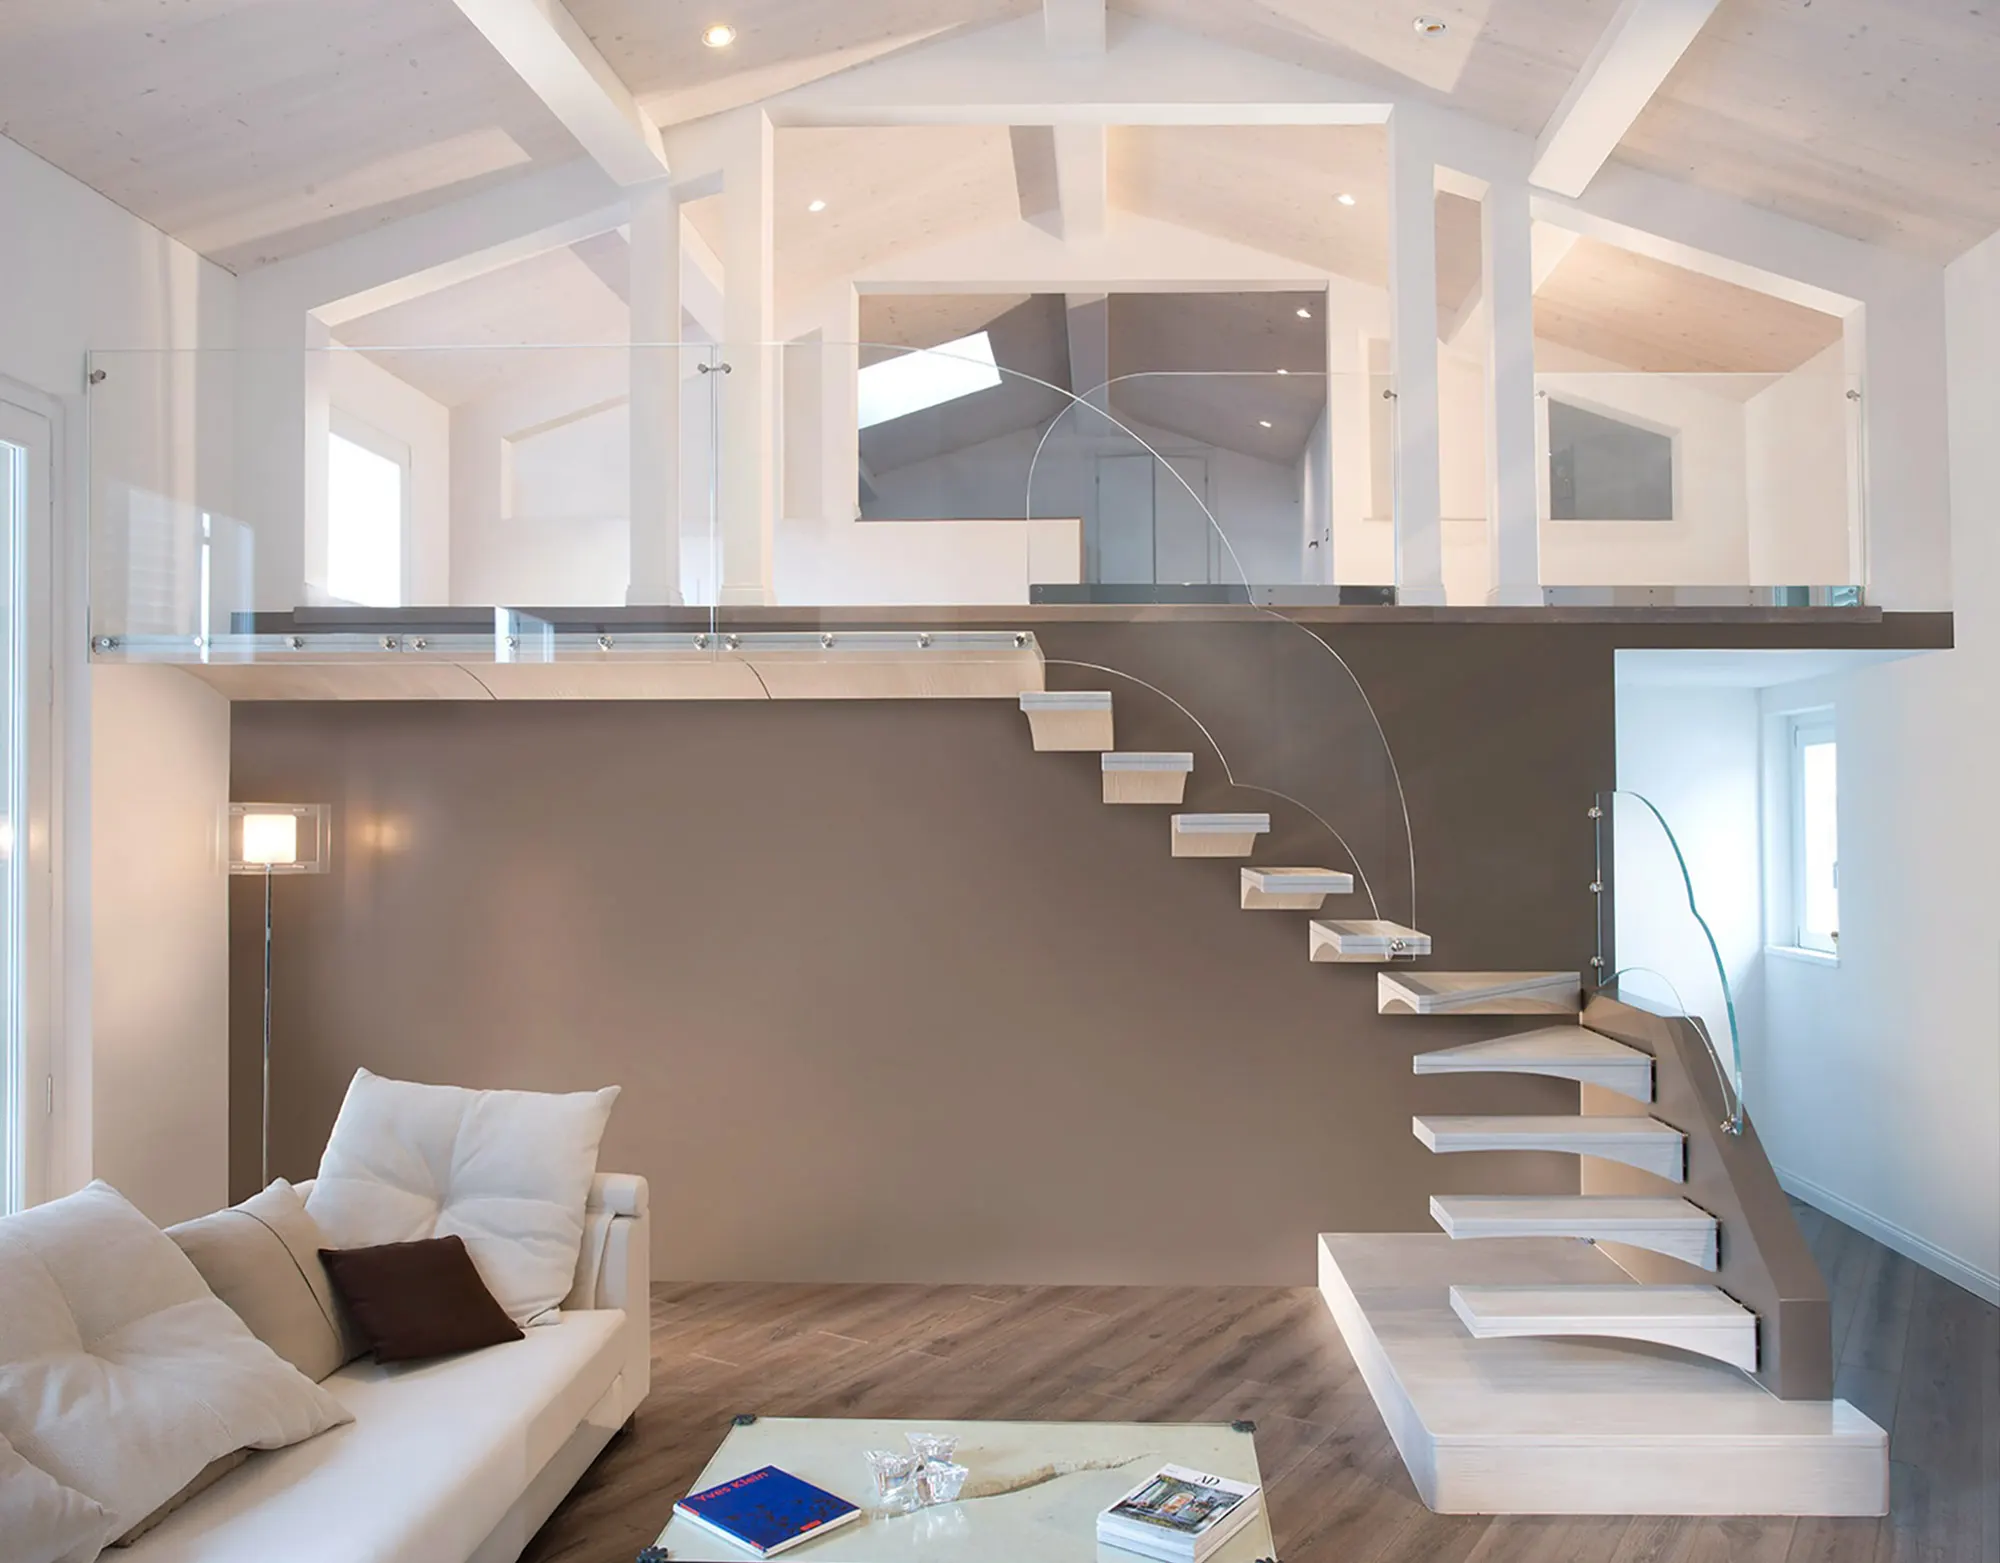 wing shaped open cantilever staircase